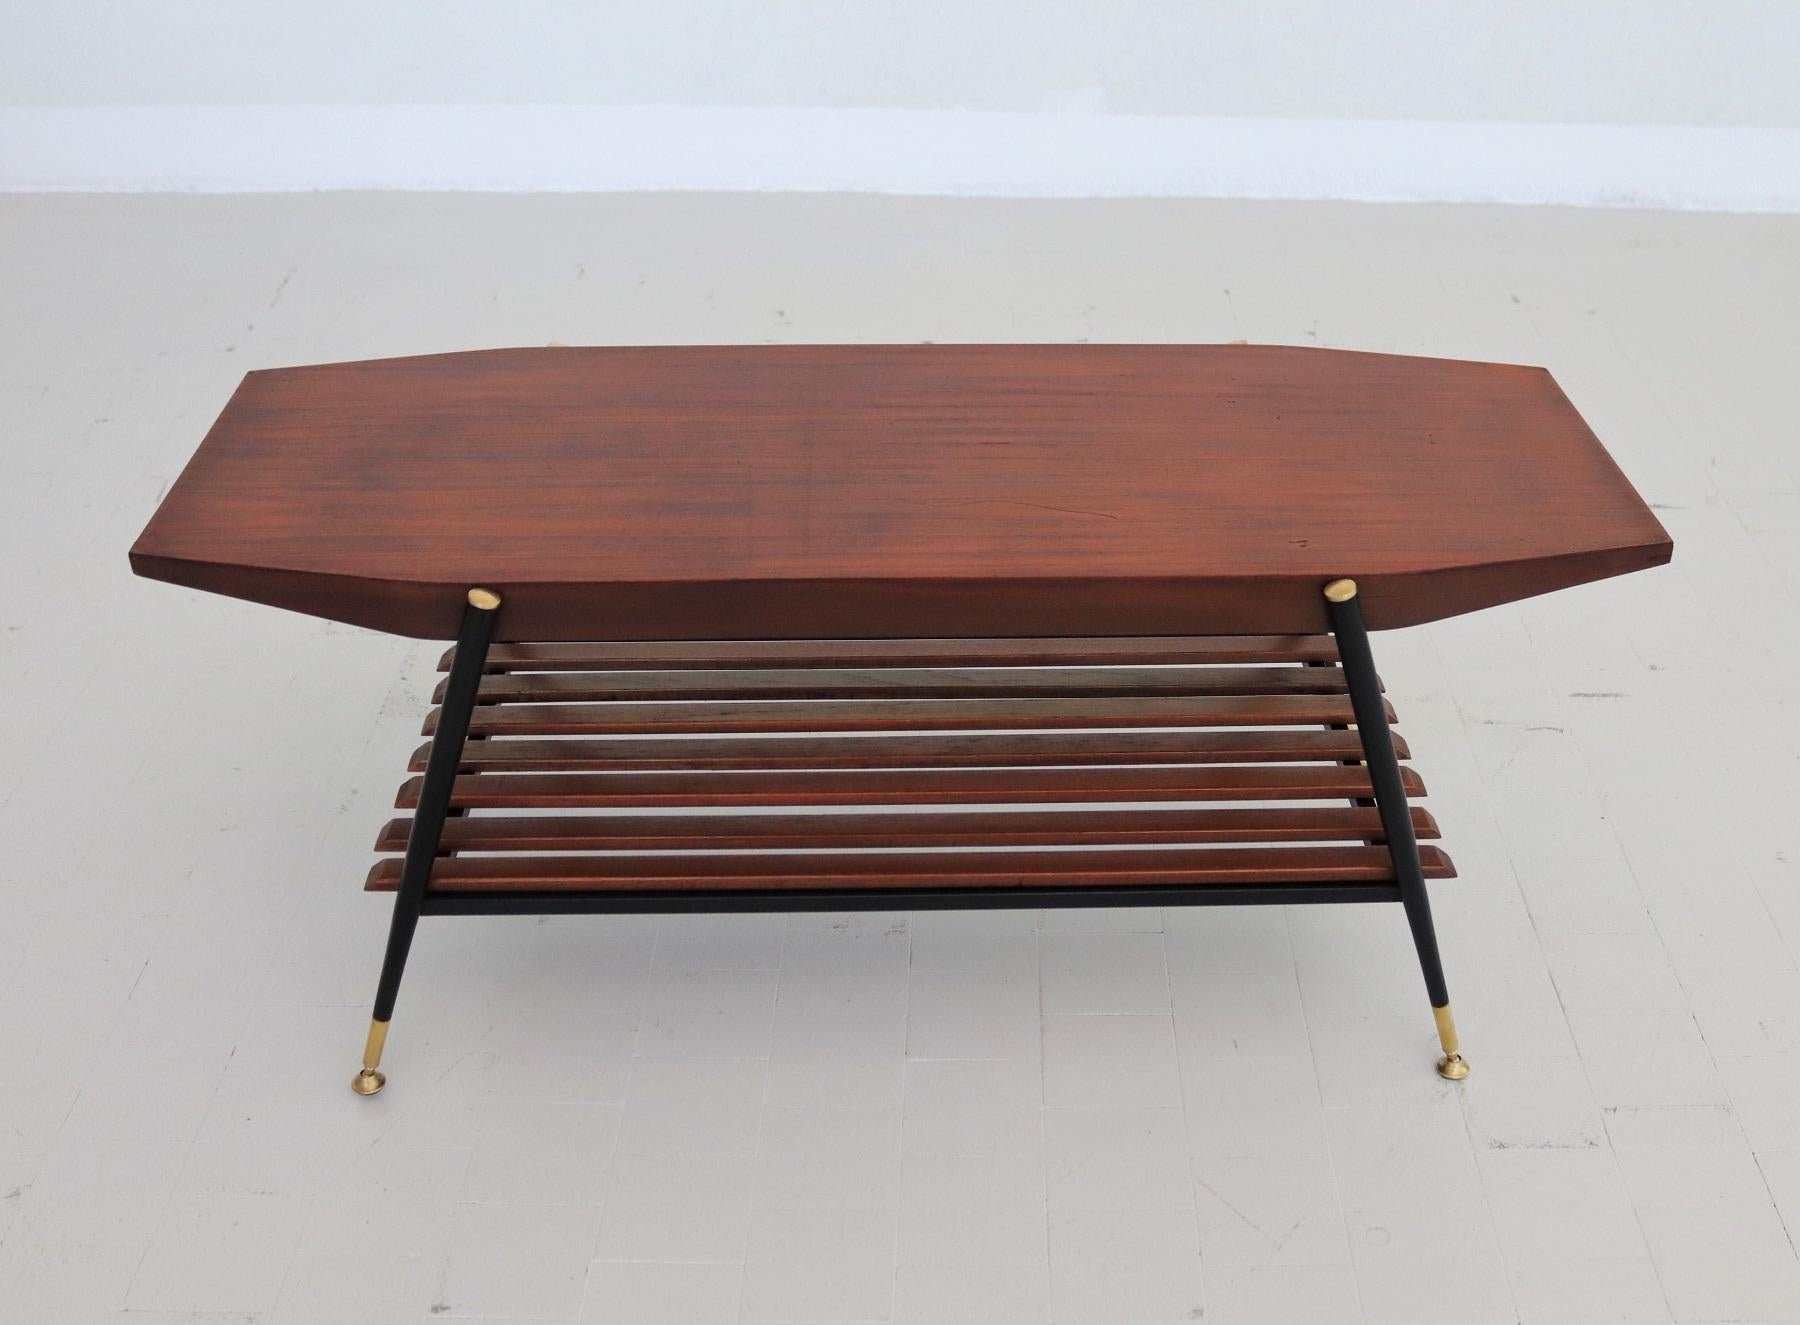 Italian Midcentury Octagonal Coffee Table in Mahogany Veneer with Brass Details For Sale 11